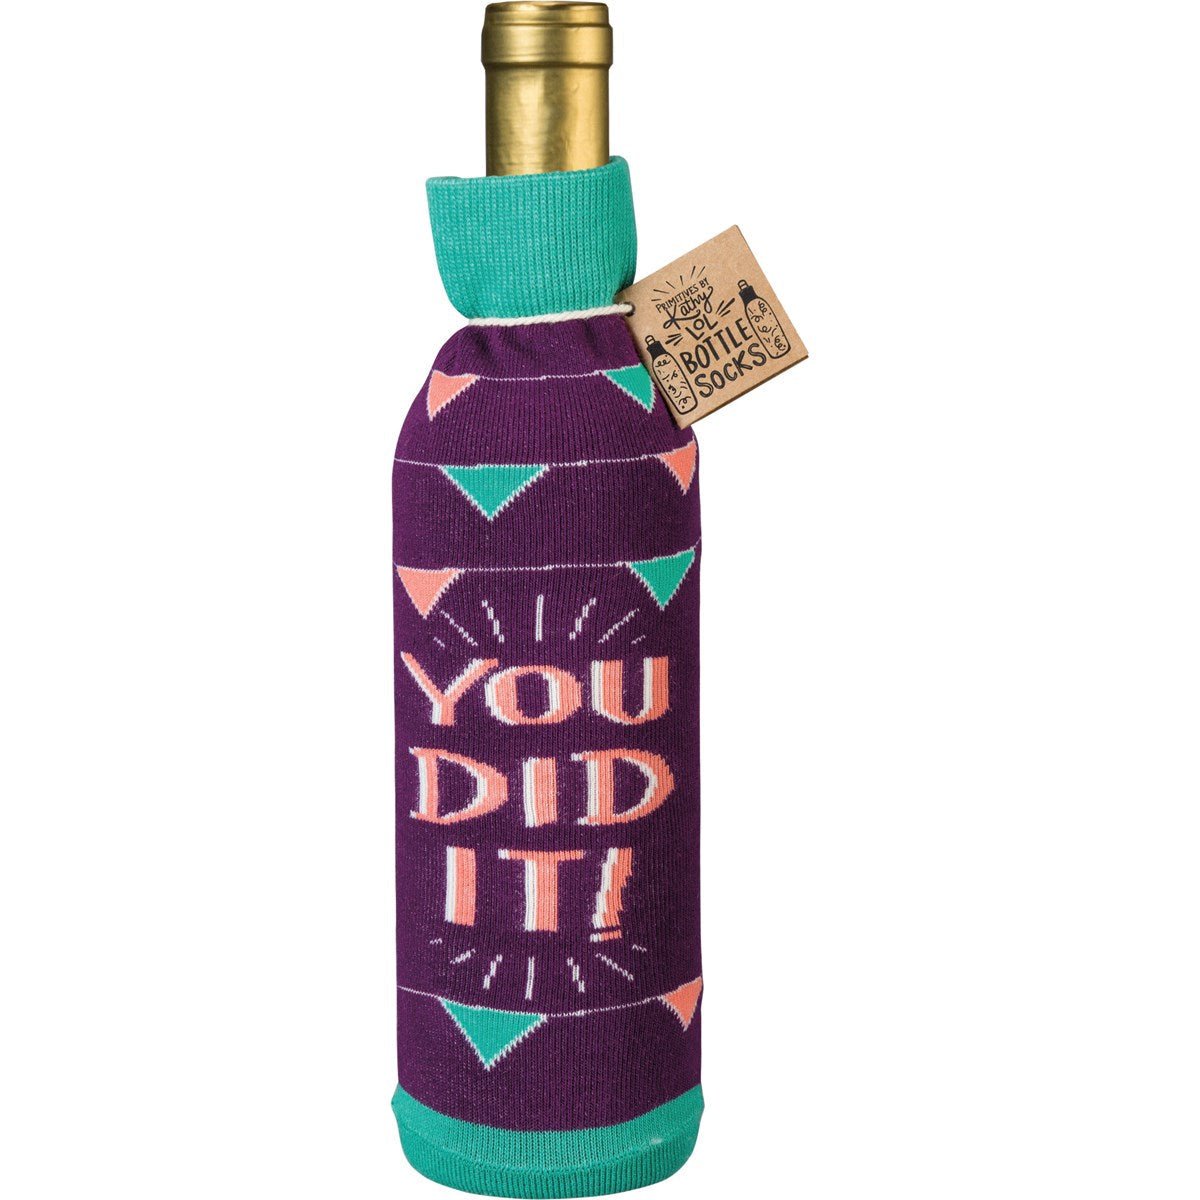 Woo Hoo! You Did It! Knit Wine Bottle Sock | Reusable Gift Bag for Gifting Wine